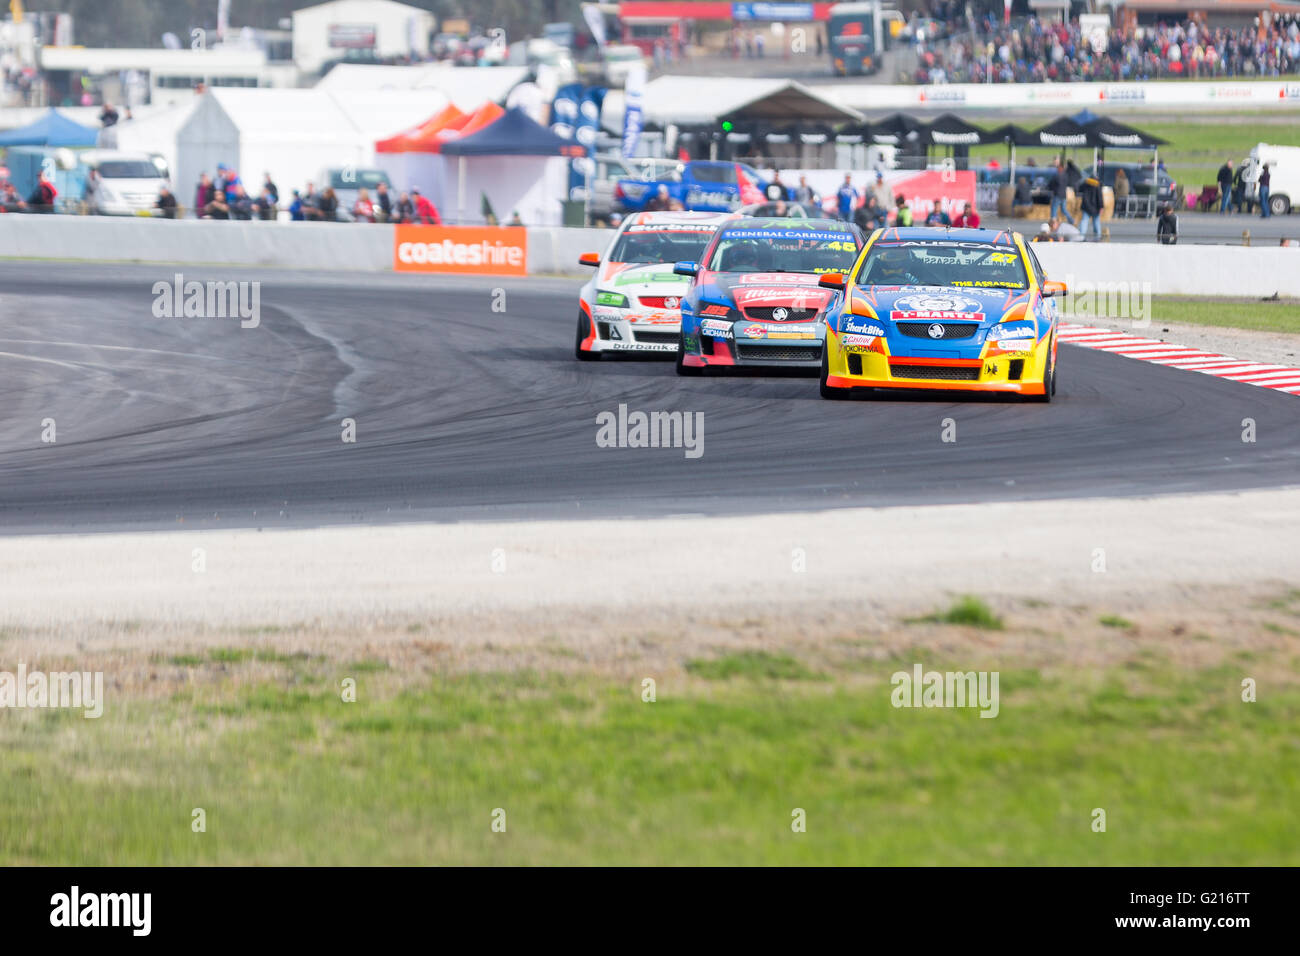 Melbourne, Australia. 22nd May, 2016. V8 Ute Racing Series at Winton Raceway. Credit:  David Hewison/Alamy Live News Stock Photo